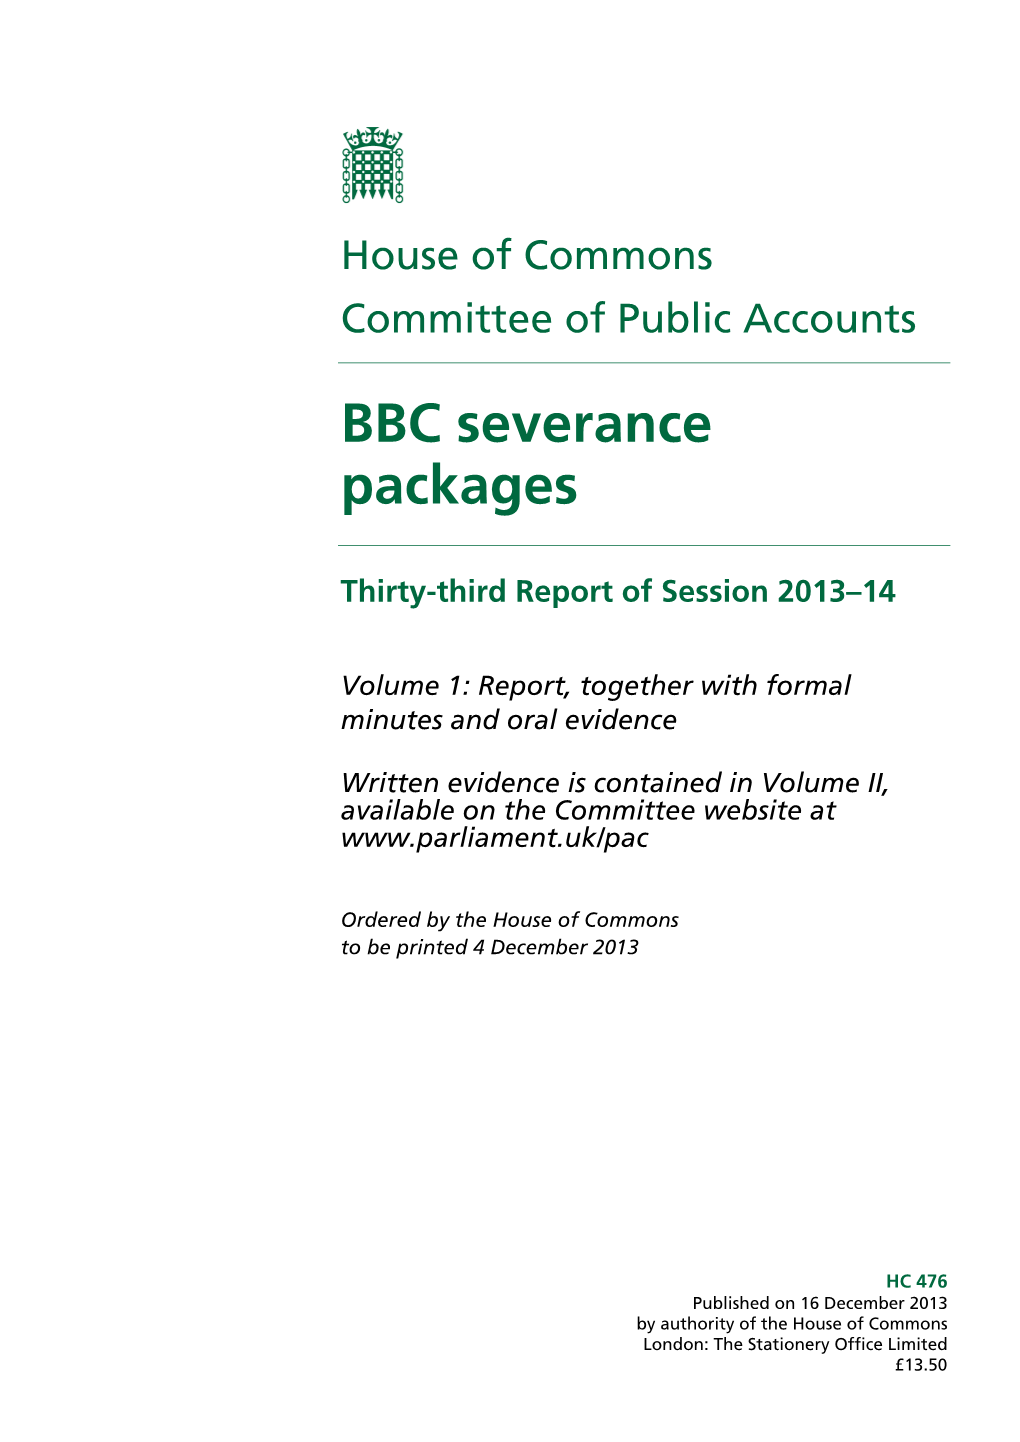 BBC Severance Packages